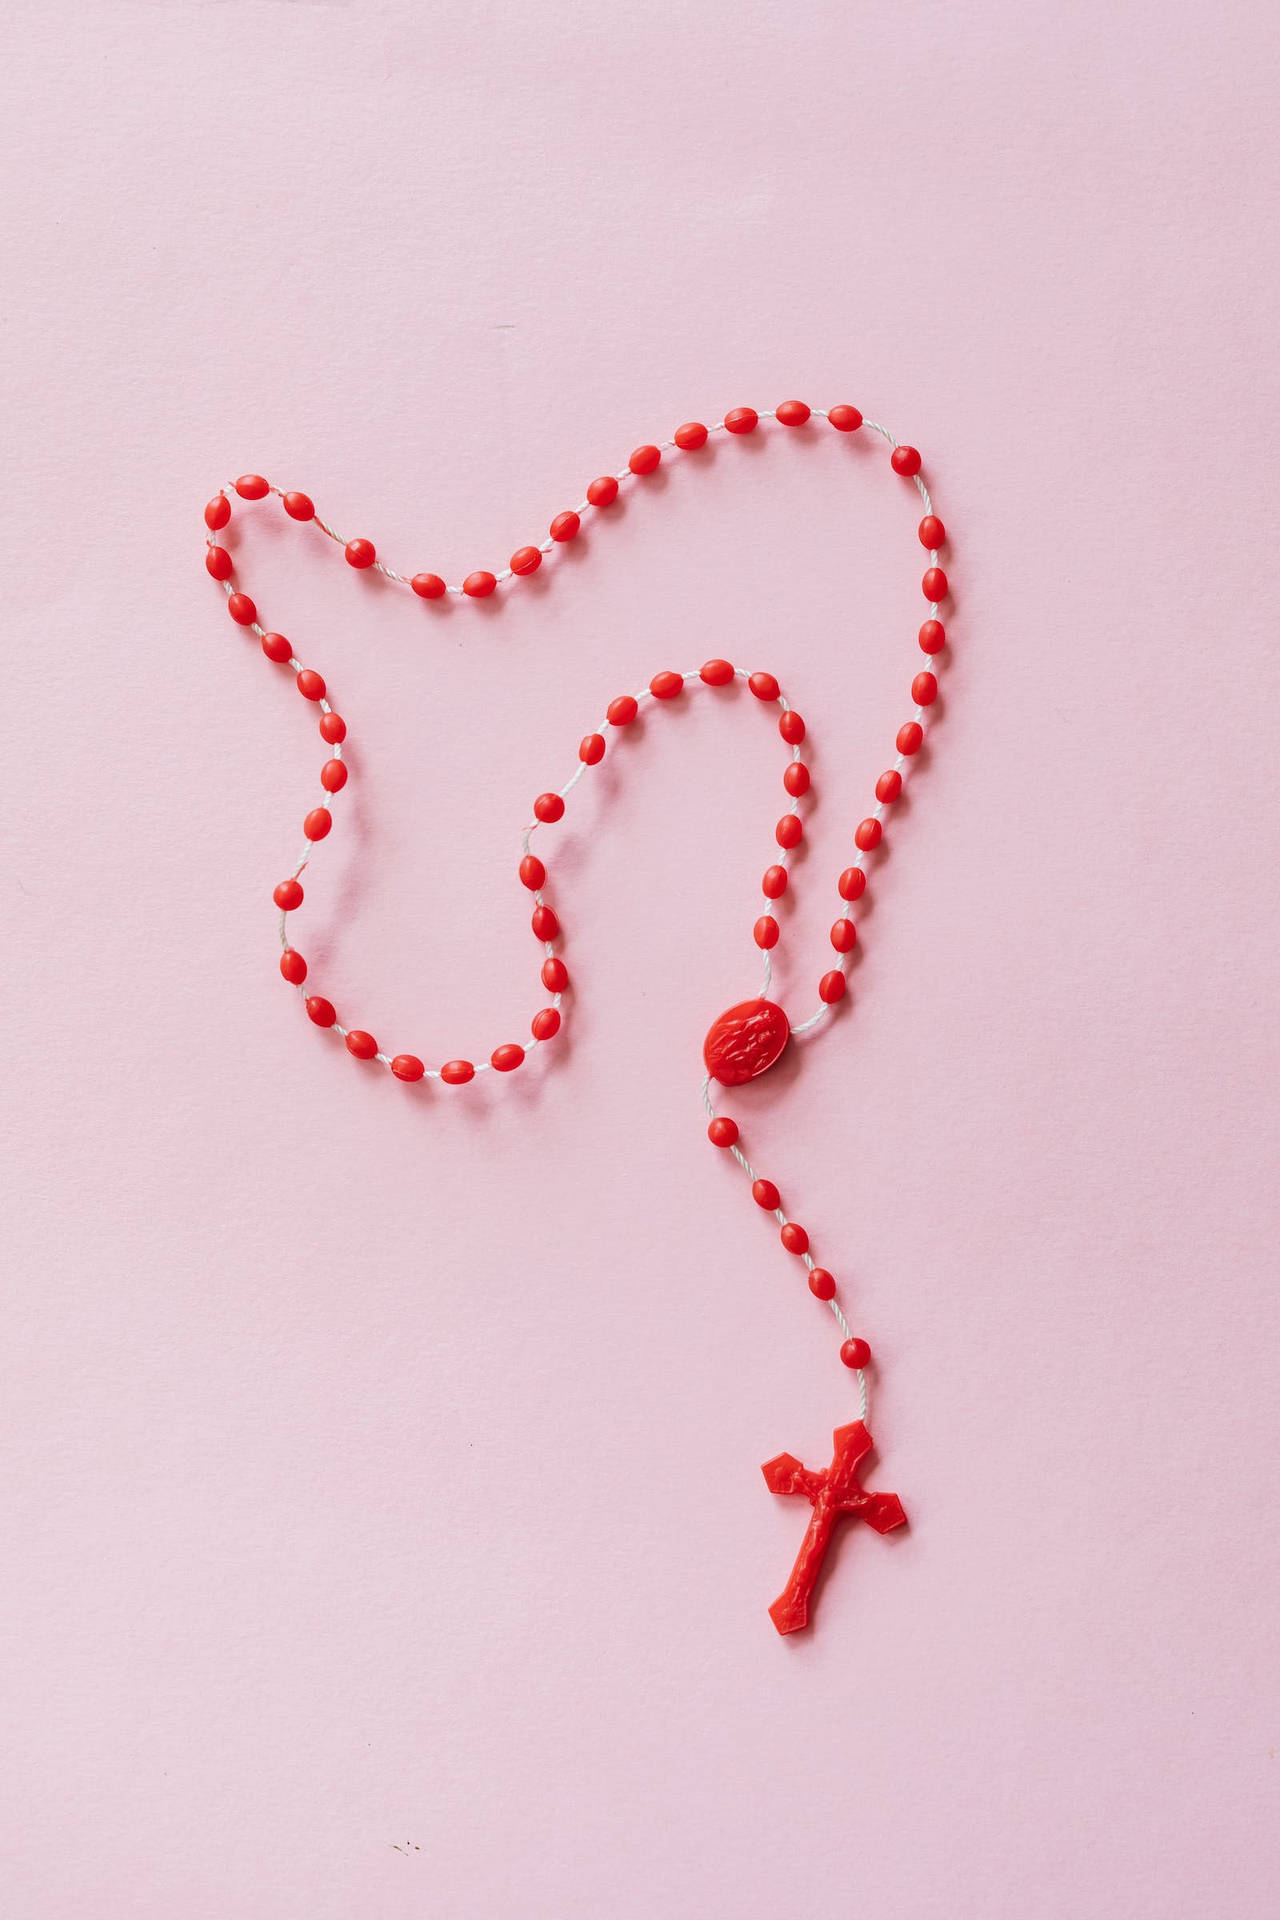 Red Rosary With Jesus On Cross Wallpaper